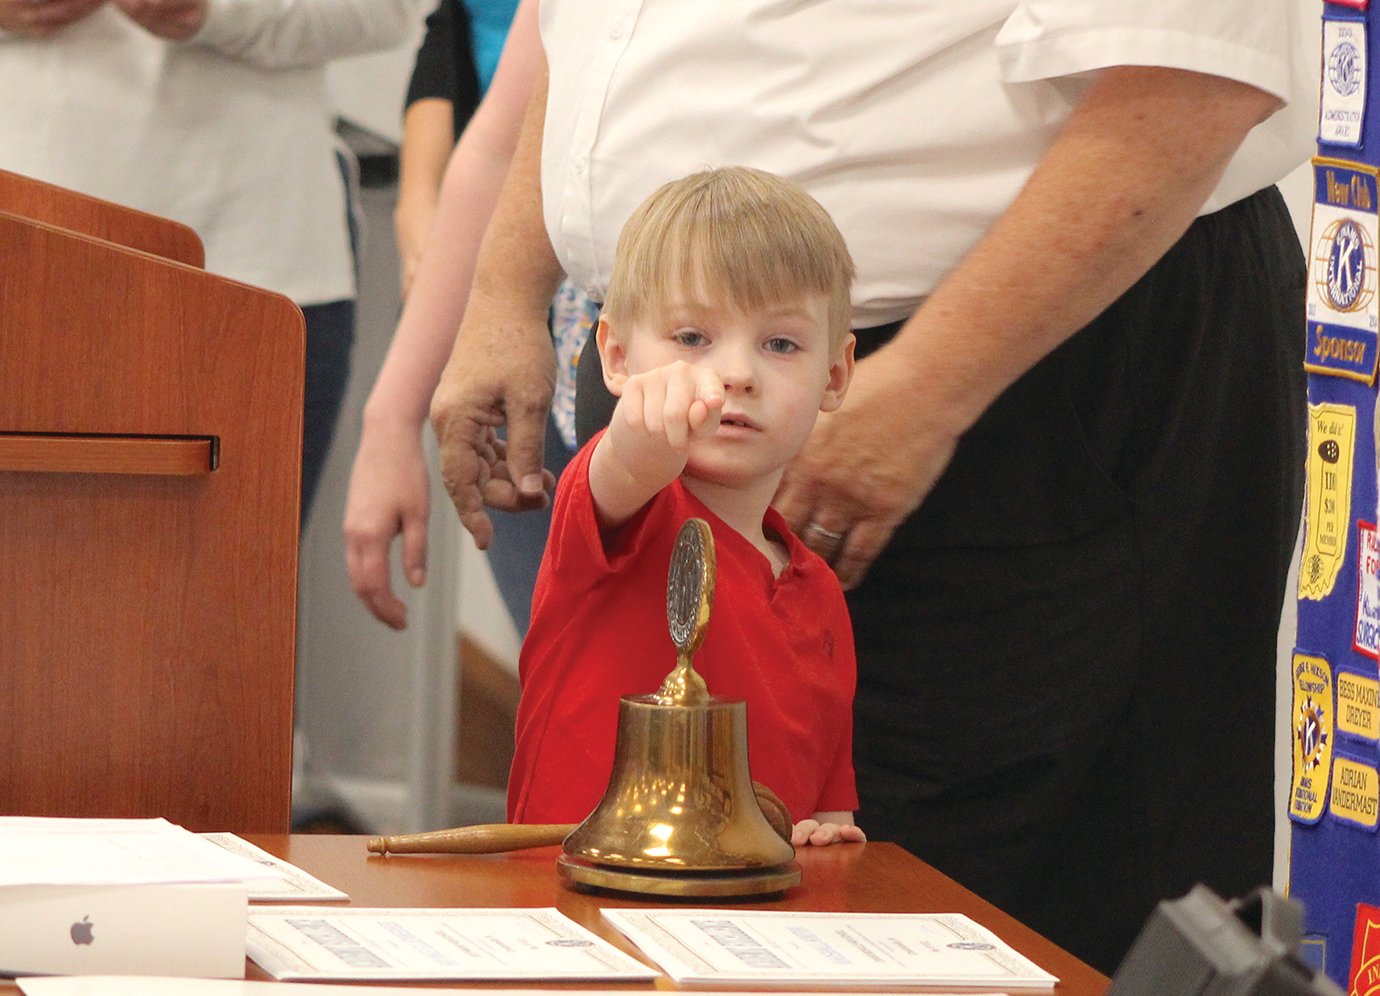 Mitchell Shell, 6, kicks off Thursday’s Kiwanis luncheon with the traditional ringing of the bell. During the meeting, Mitchell, a child with autism, received a new iPad pre-loaded with adaptive tools and applications designed to facilitate communication between Mitchell and loved ones, friends and teachers. Accompanied by his mother, Nicole Crombie, the pair were visibly grateful for the Kiwanis donation, which couldn’t be more apparent than through their smiles upon receiving the device.